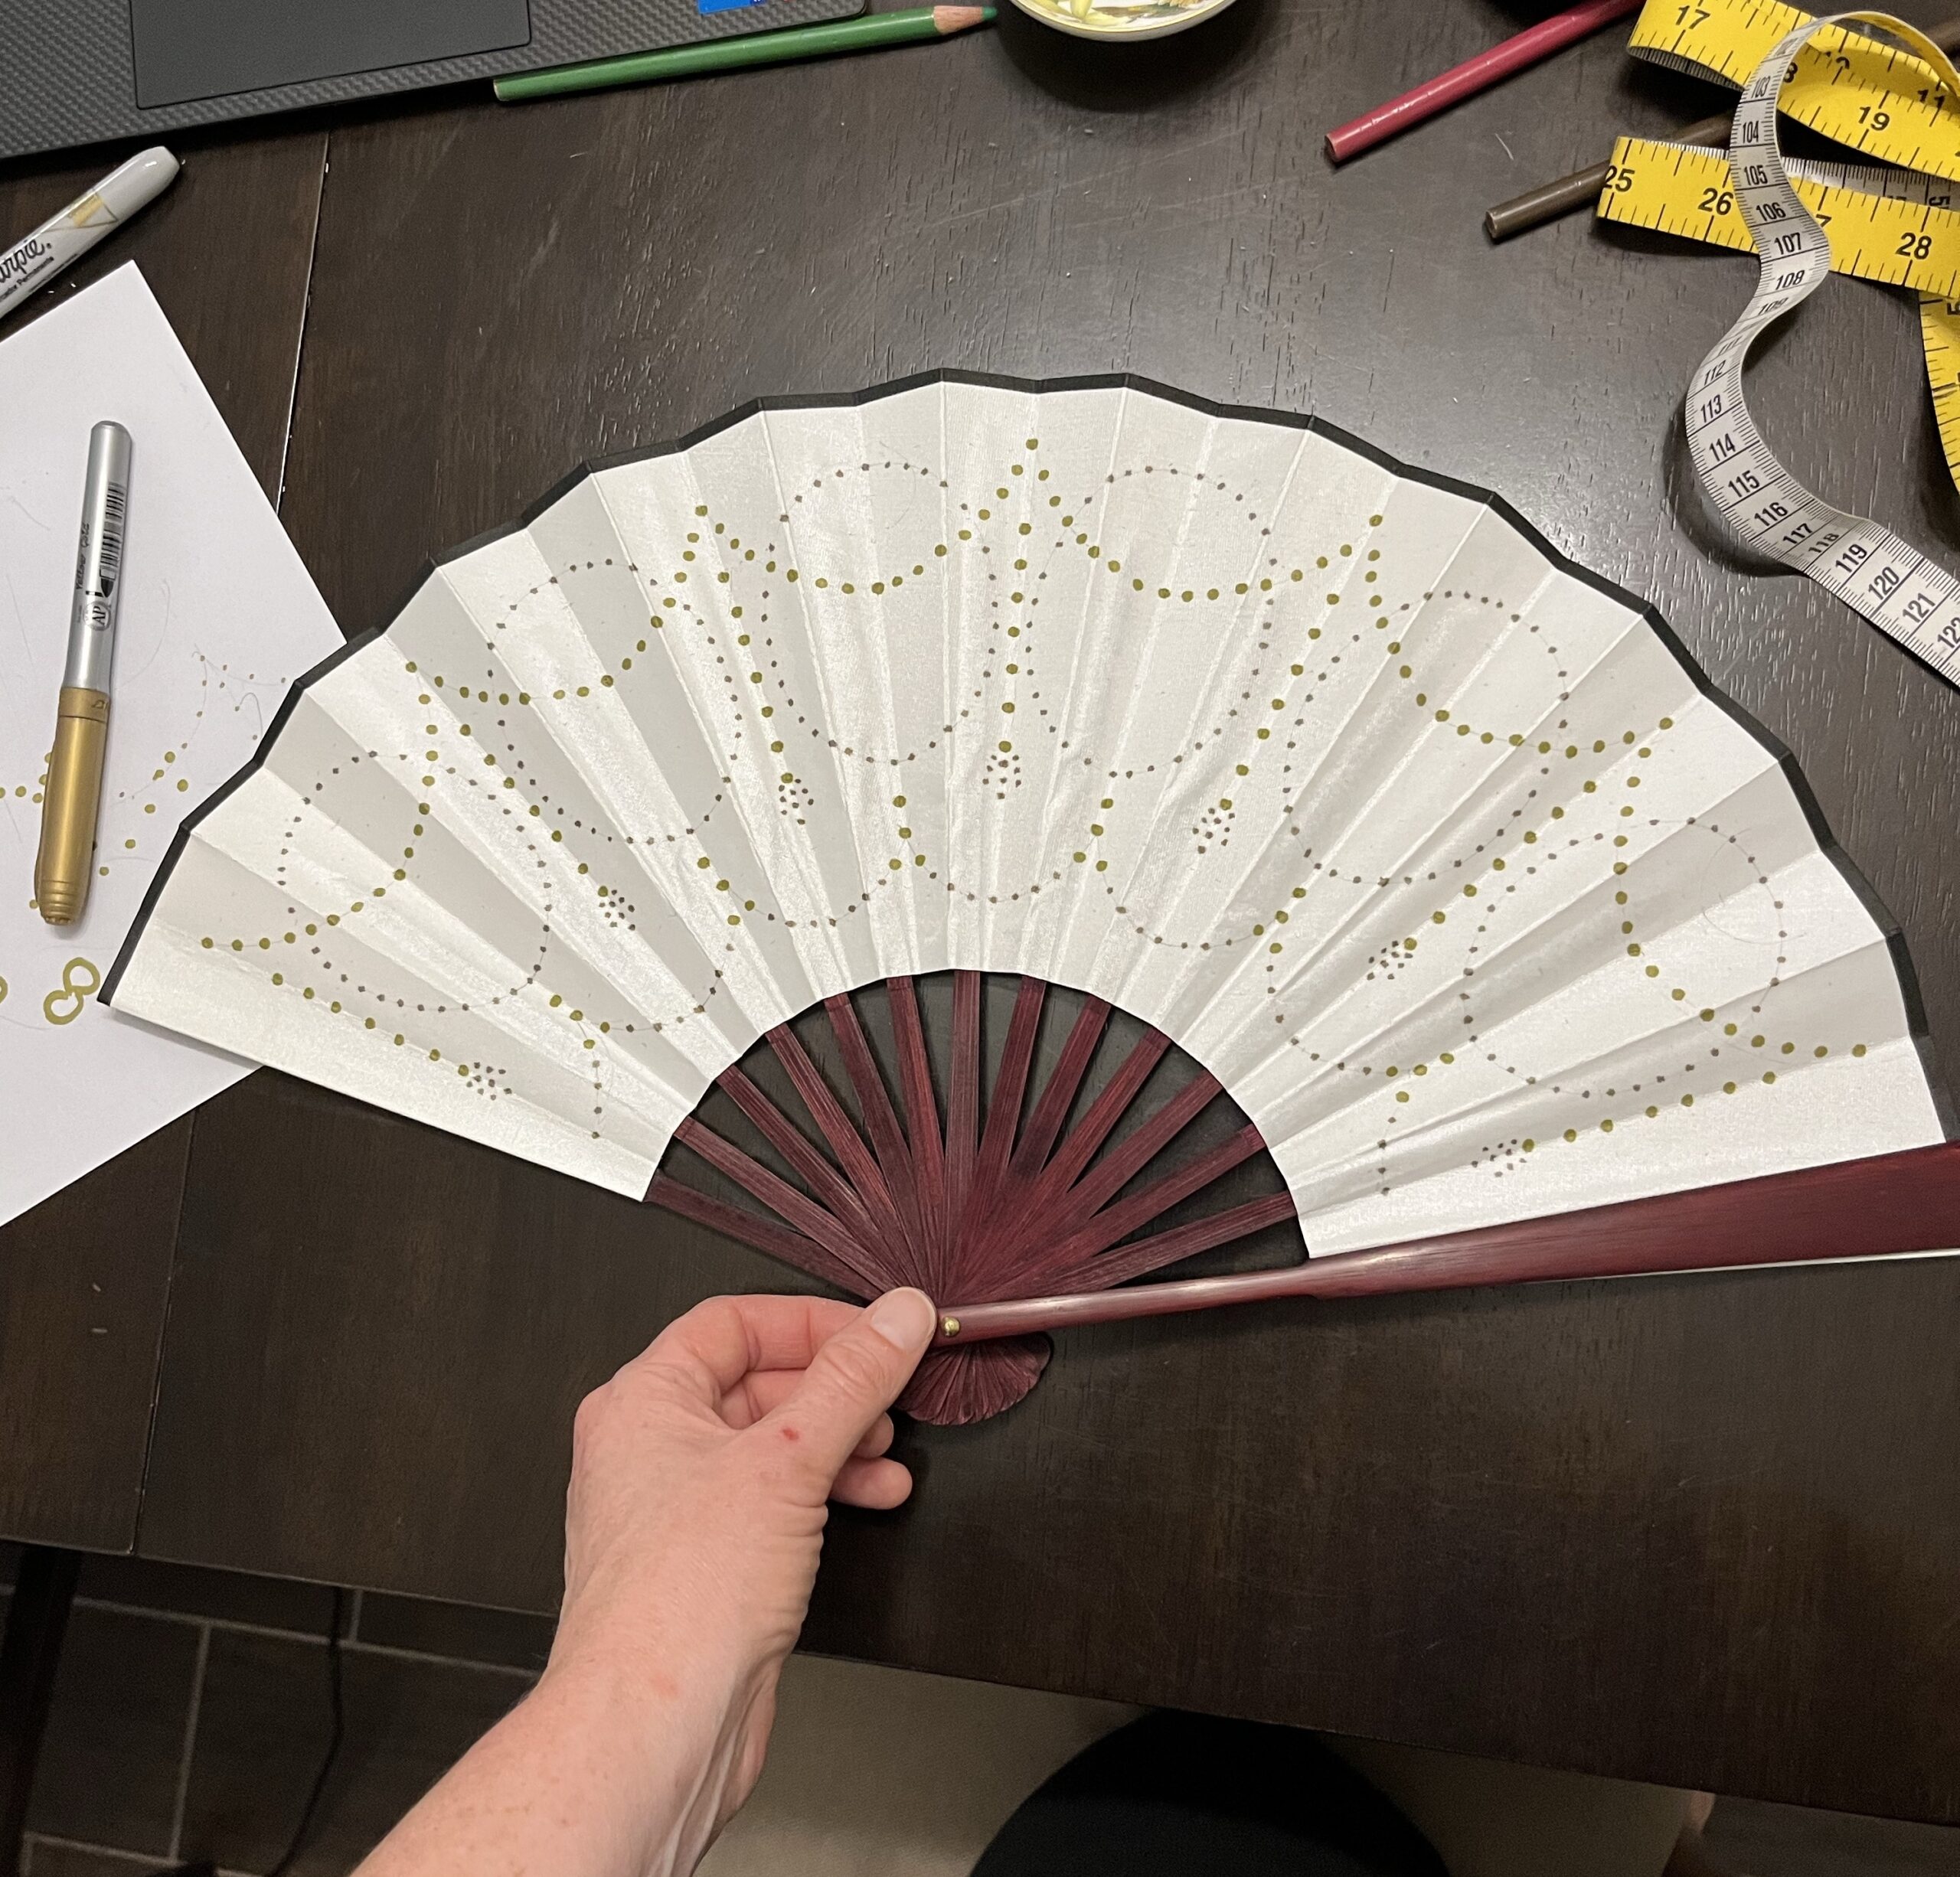 A white paper fan painted with arabesques of gold polka dots.